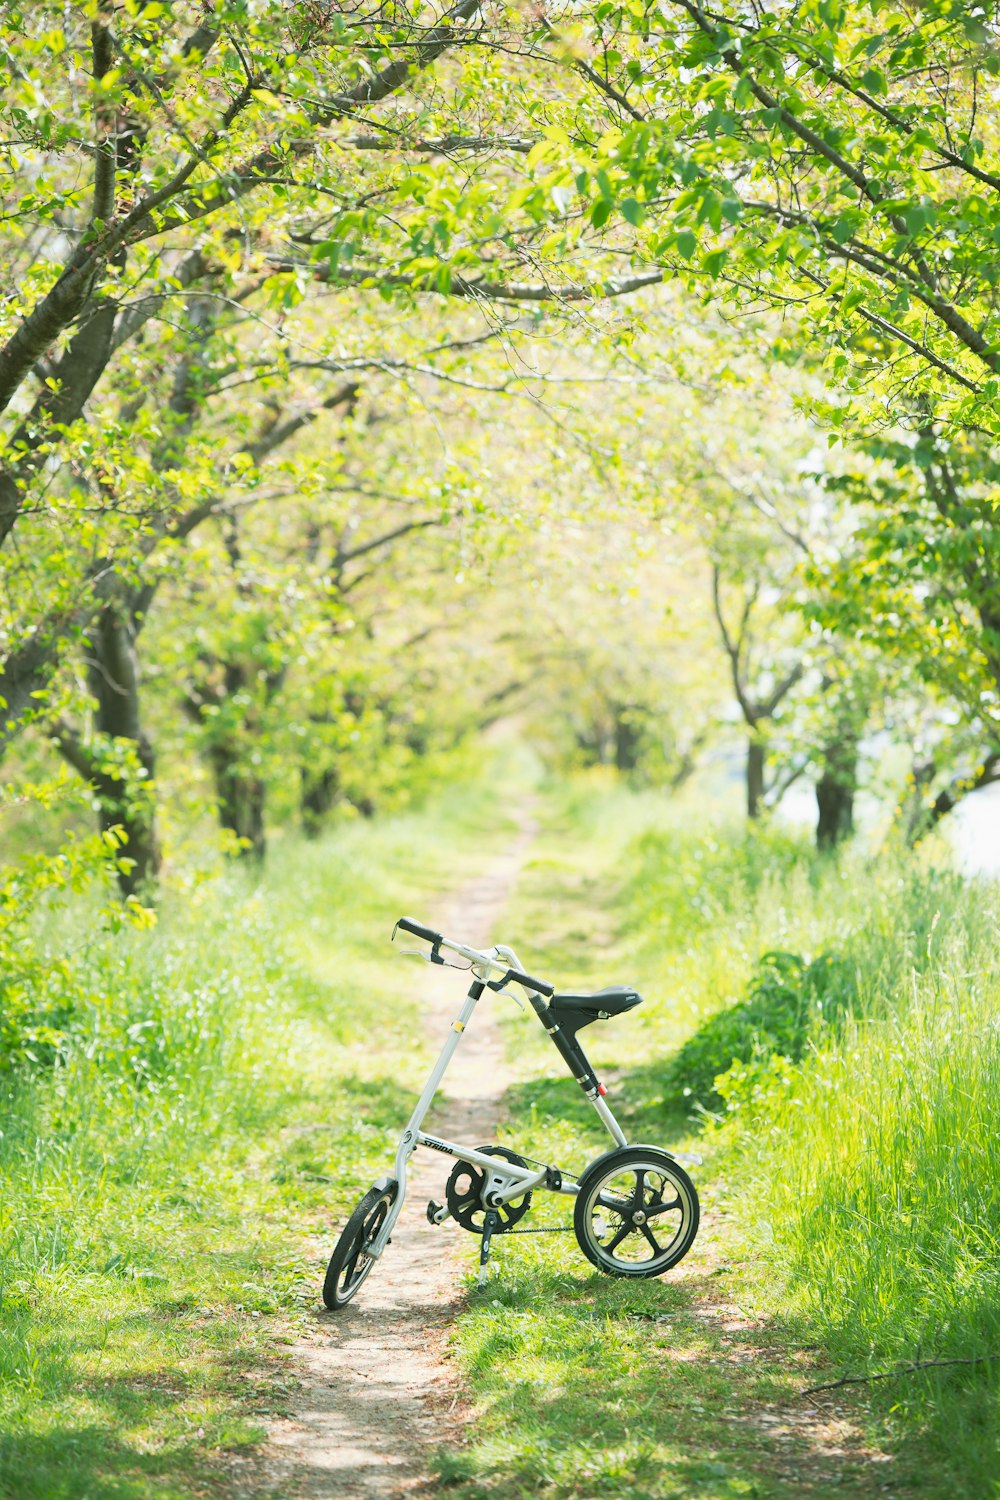 black bicycle on green grass field during daytime